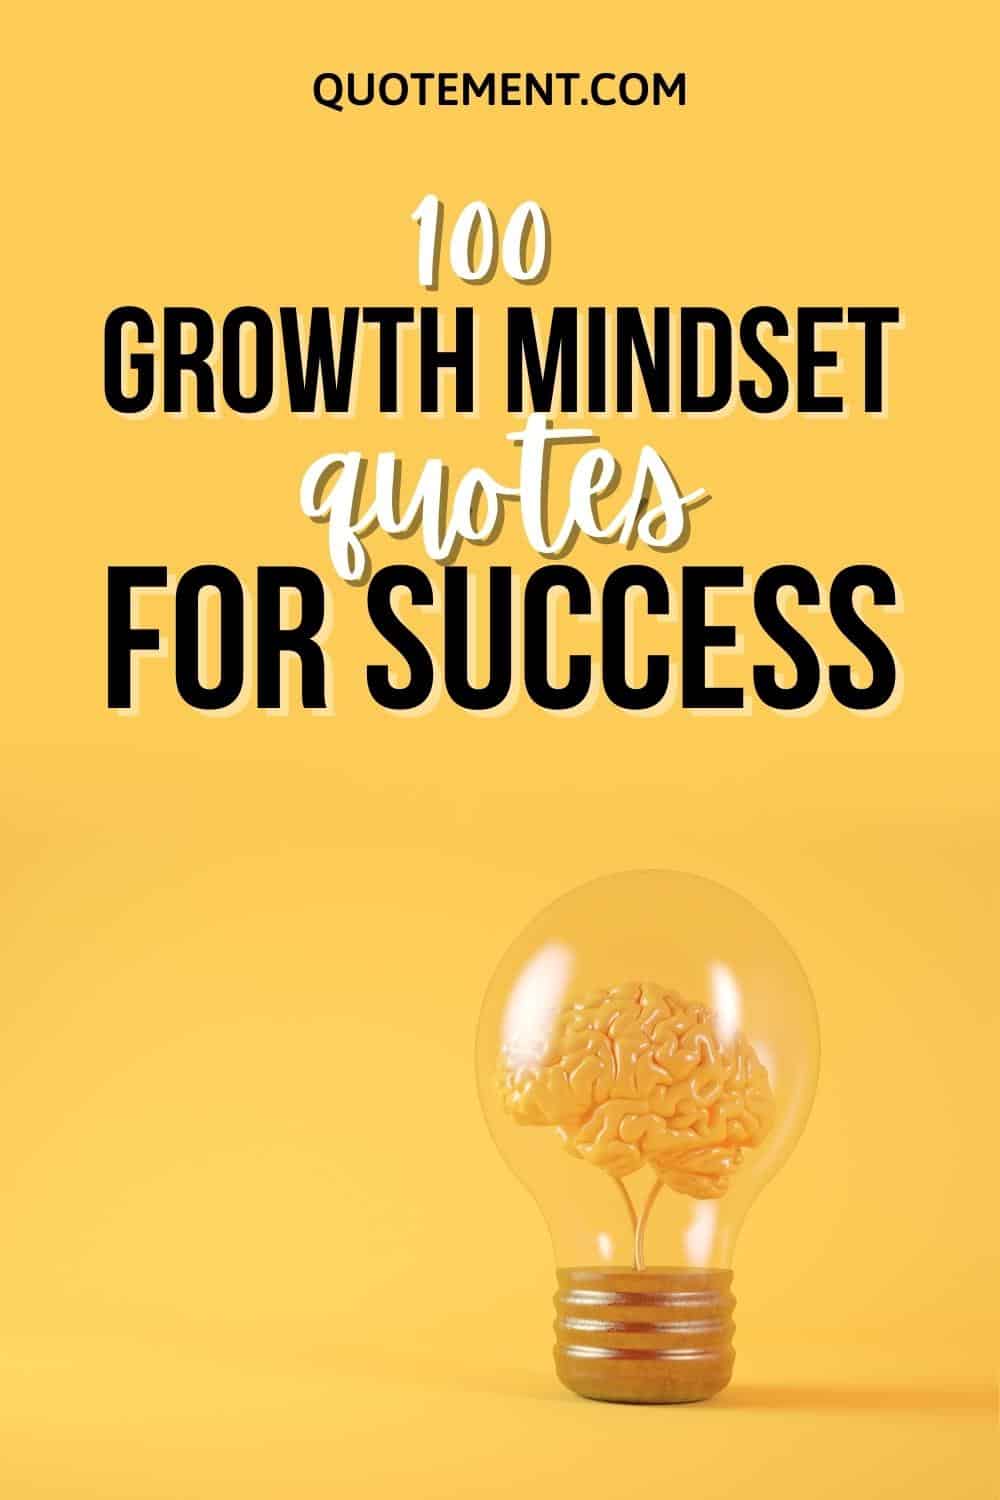 100 Growth Mindset Quotes For Those Who Want To Succeed
